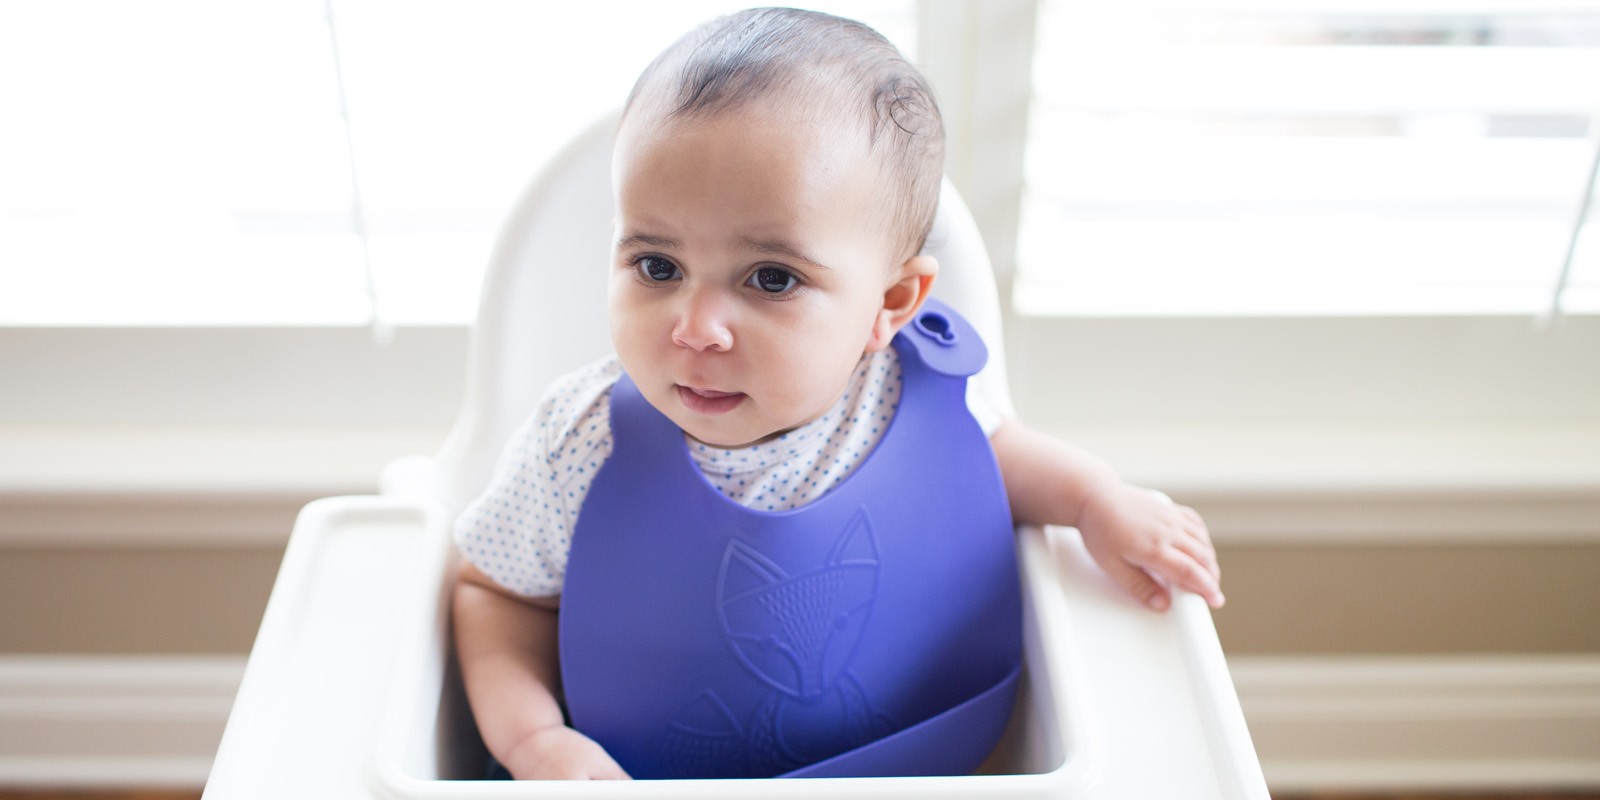 Toddler at high chair with silicone bib